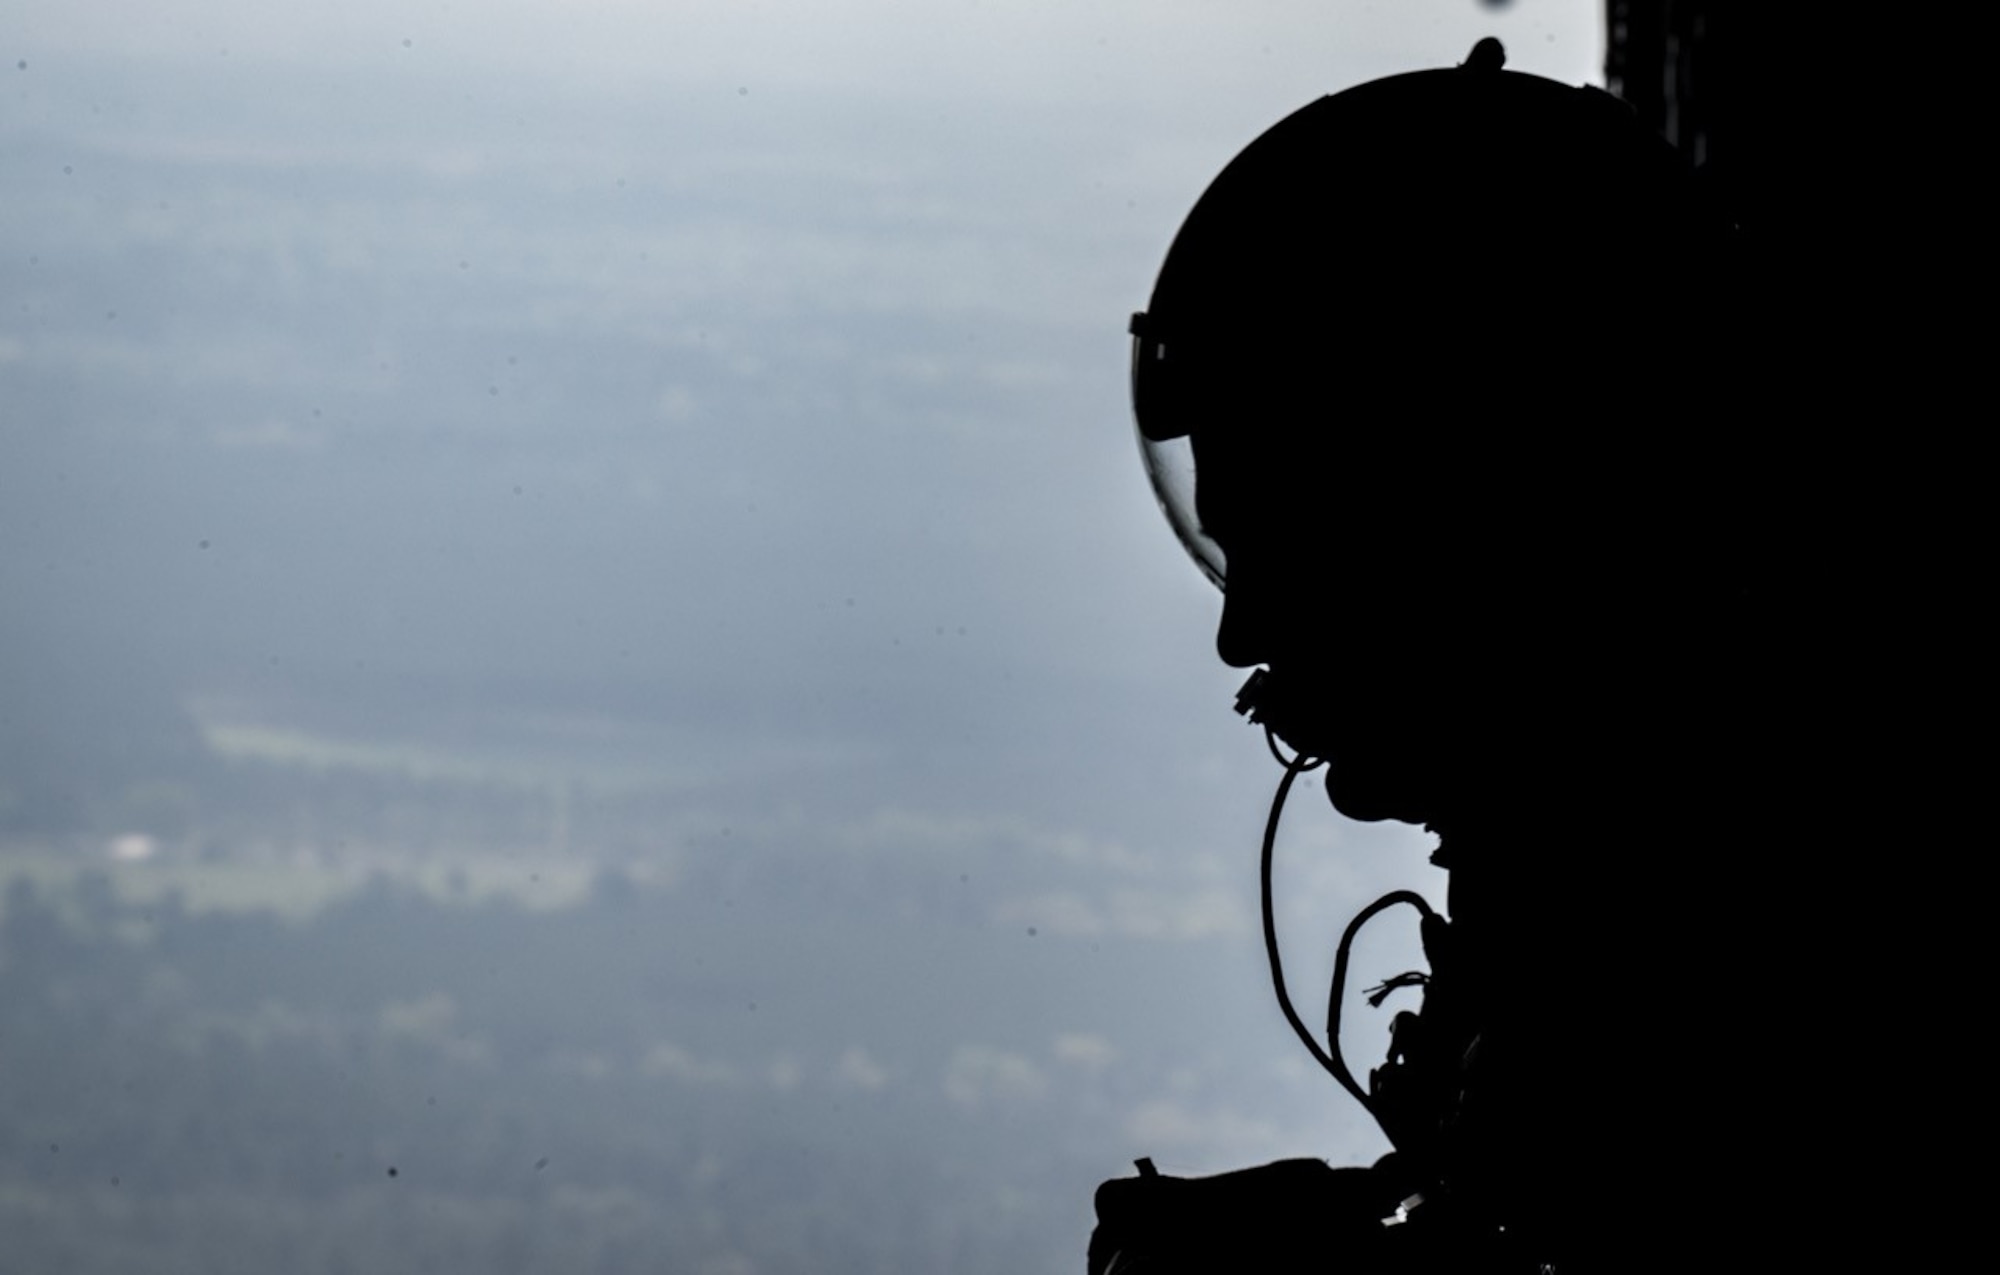 Tech. Sgt. Jonathan Packer, 815th Airlift Squadron,  looks out of a C-130J Super Hercules aircraft after doing an air drop March 19  in Alexandria, Louisiana. The airdrop was part of a mission during the Green Flag Little Rock 17-05 exercise. (U.S. Air Force photo/Staff Sgt. Shelton Sherrill)